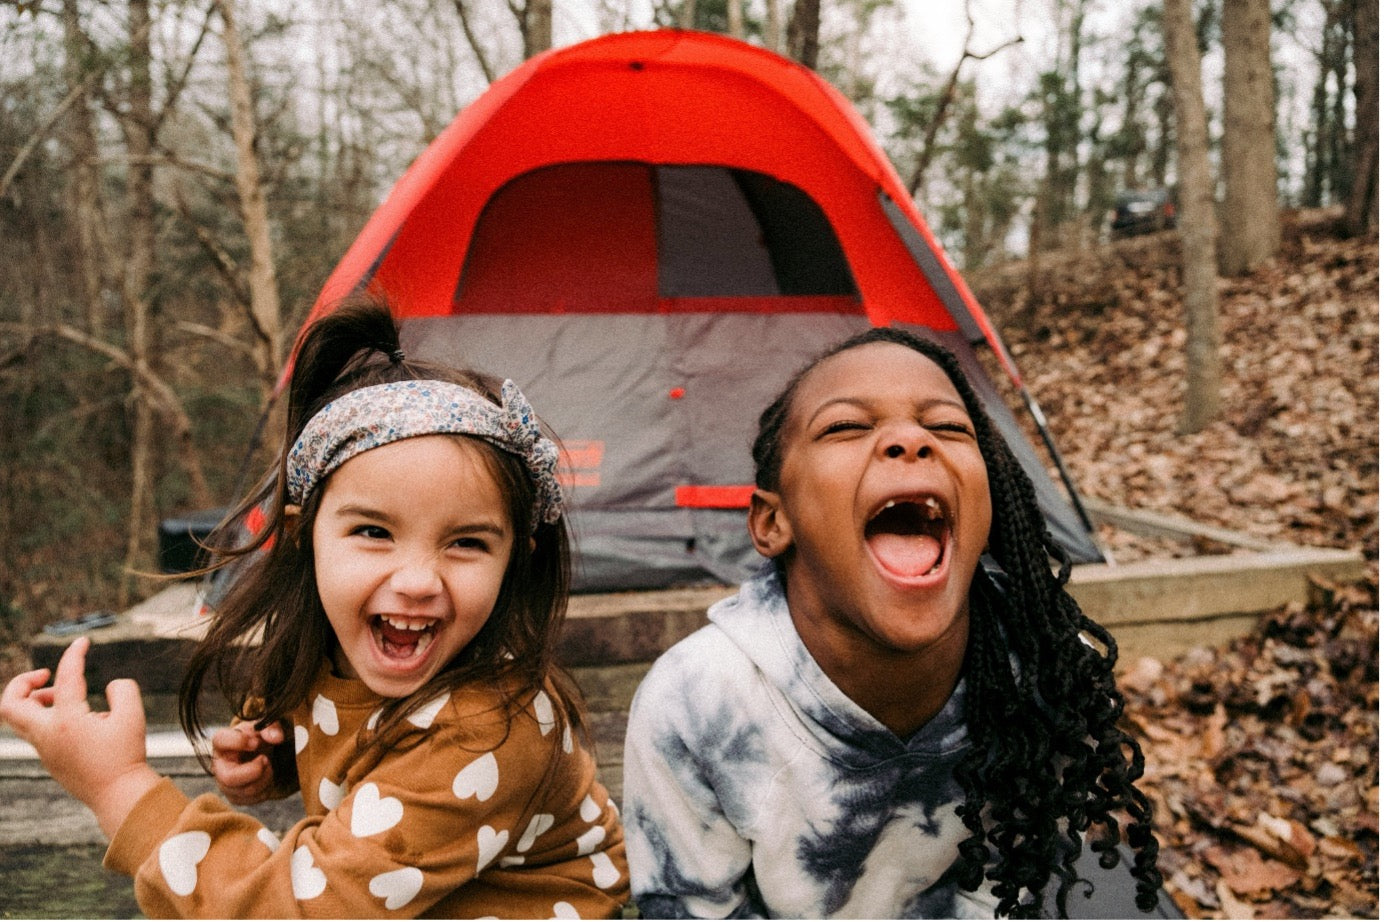 Why should you take kids camping